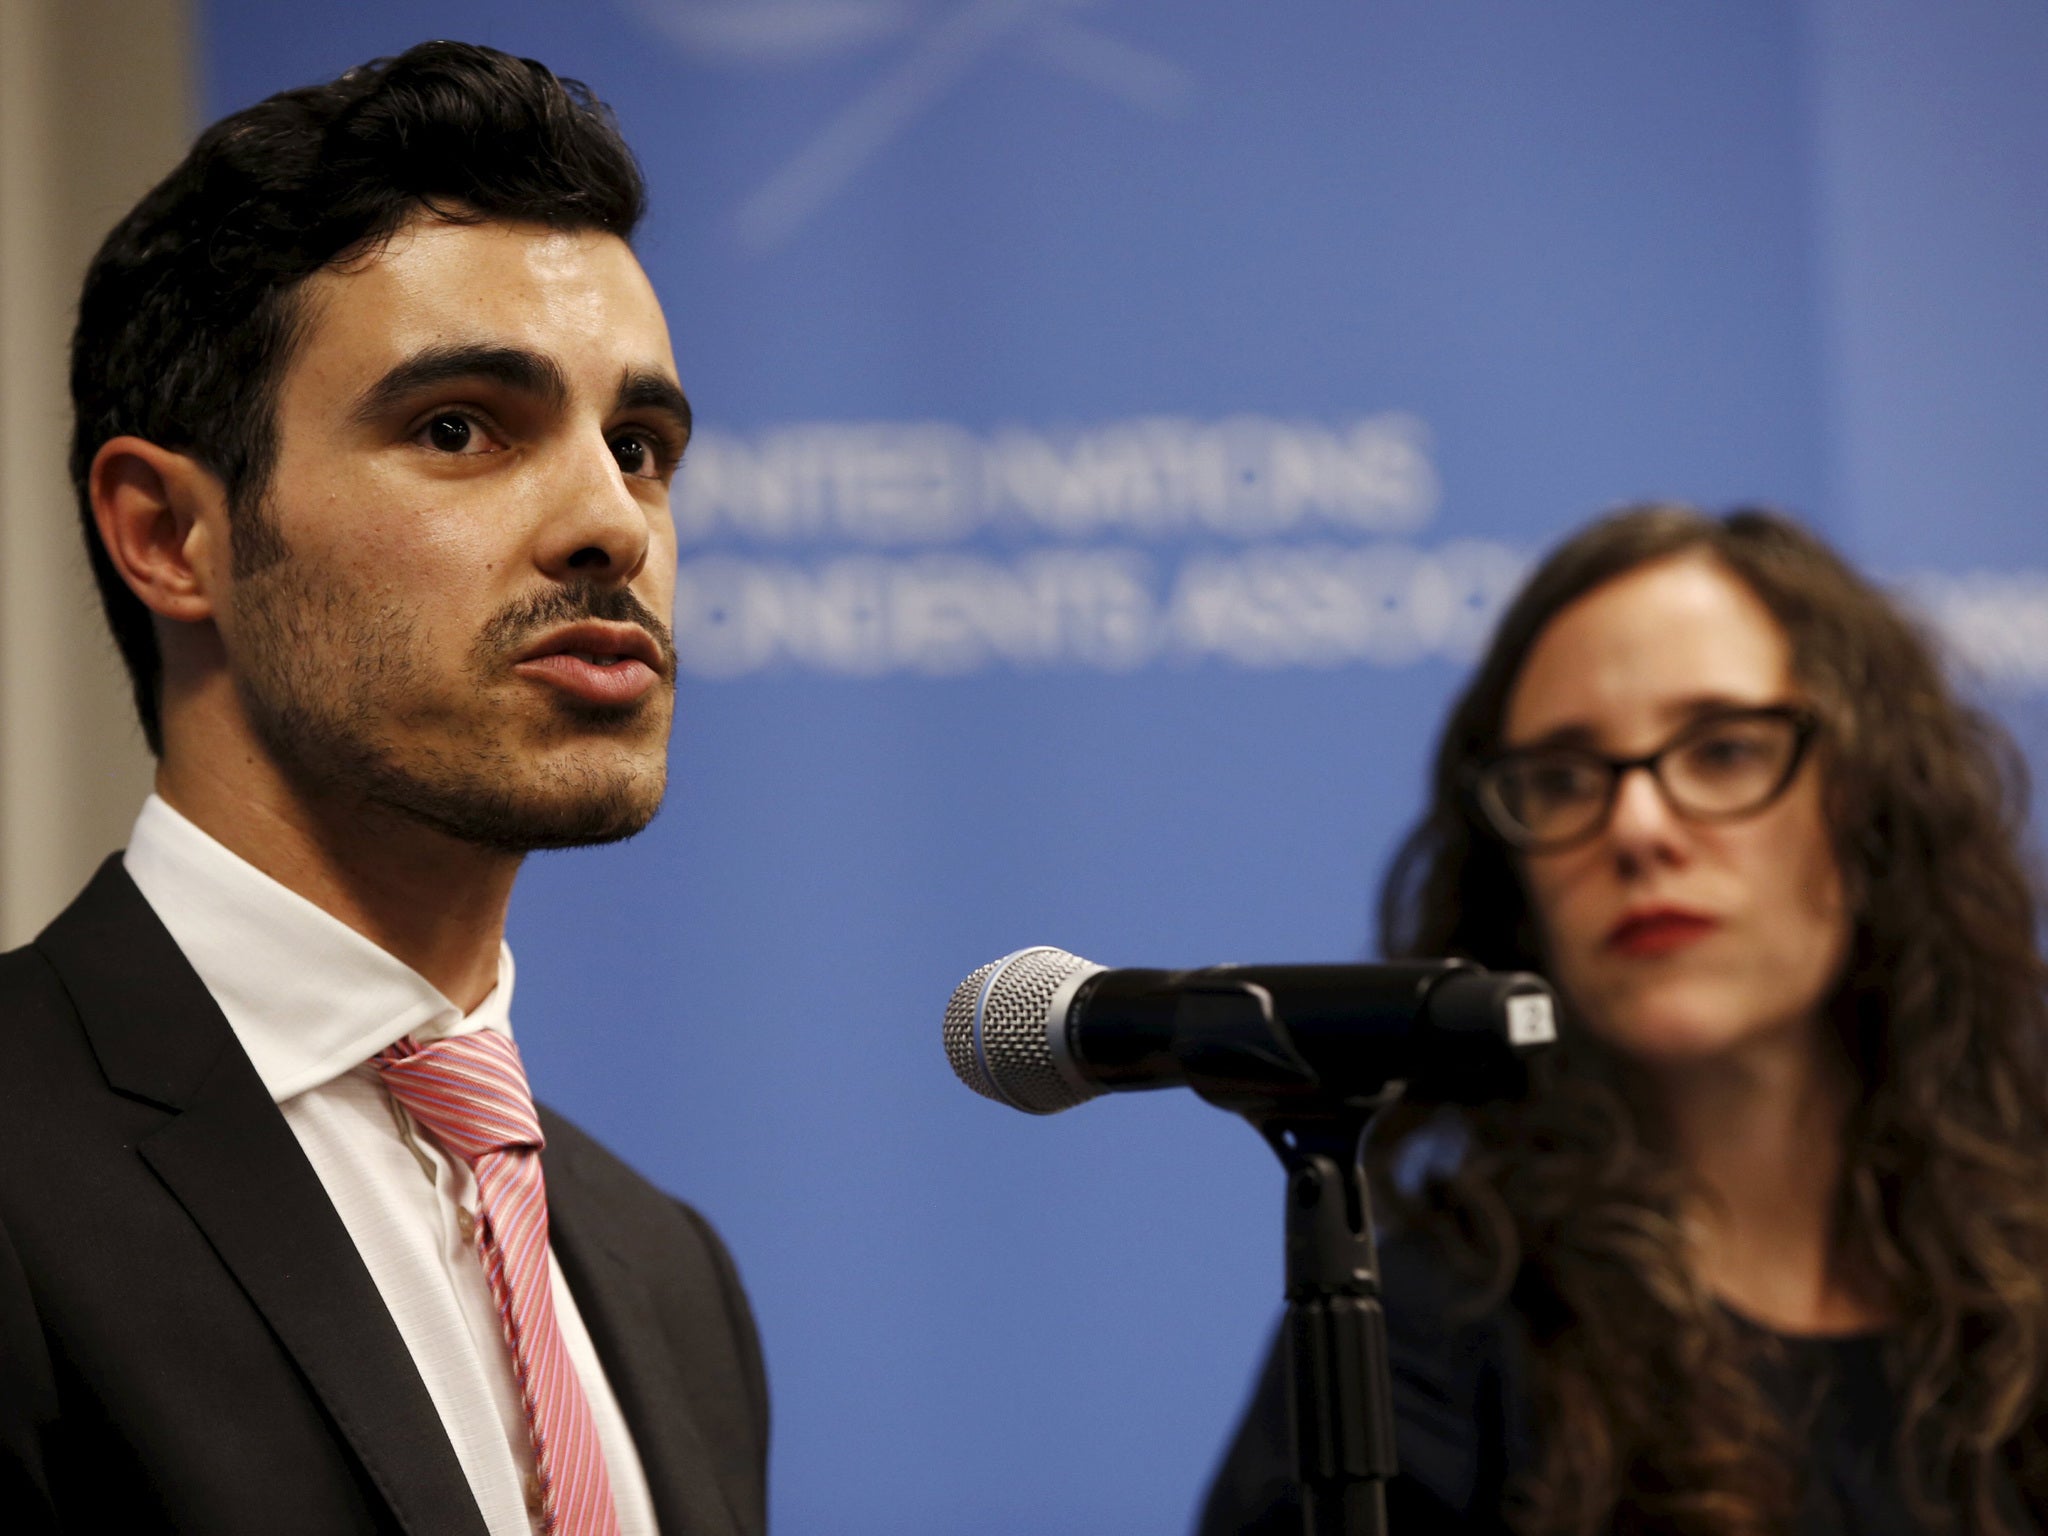 Gay Syrian refugee Subhi Nahas (L) speaks as Jessica Stern, Executive Director of the International Gay & Lesbian Human Rights Commission (R) looks on, at a news conference at the United Nations headquarters in New York,